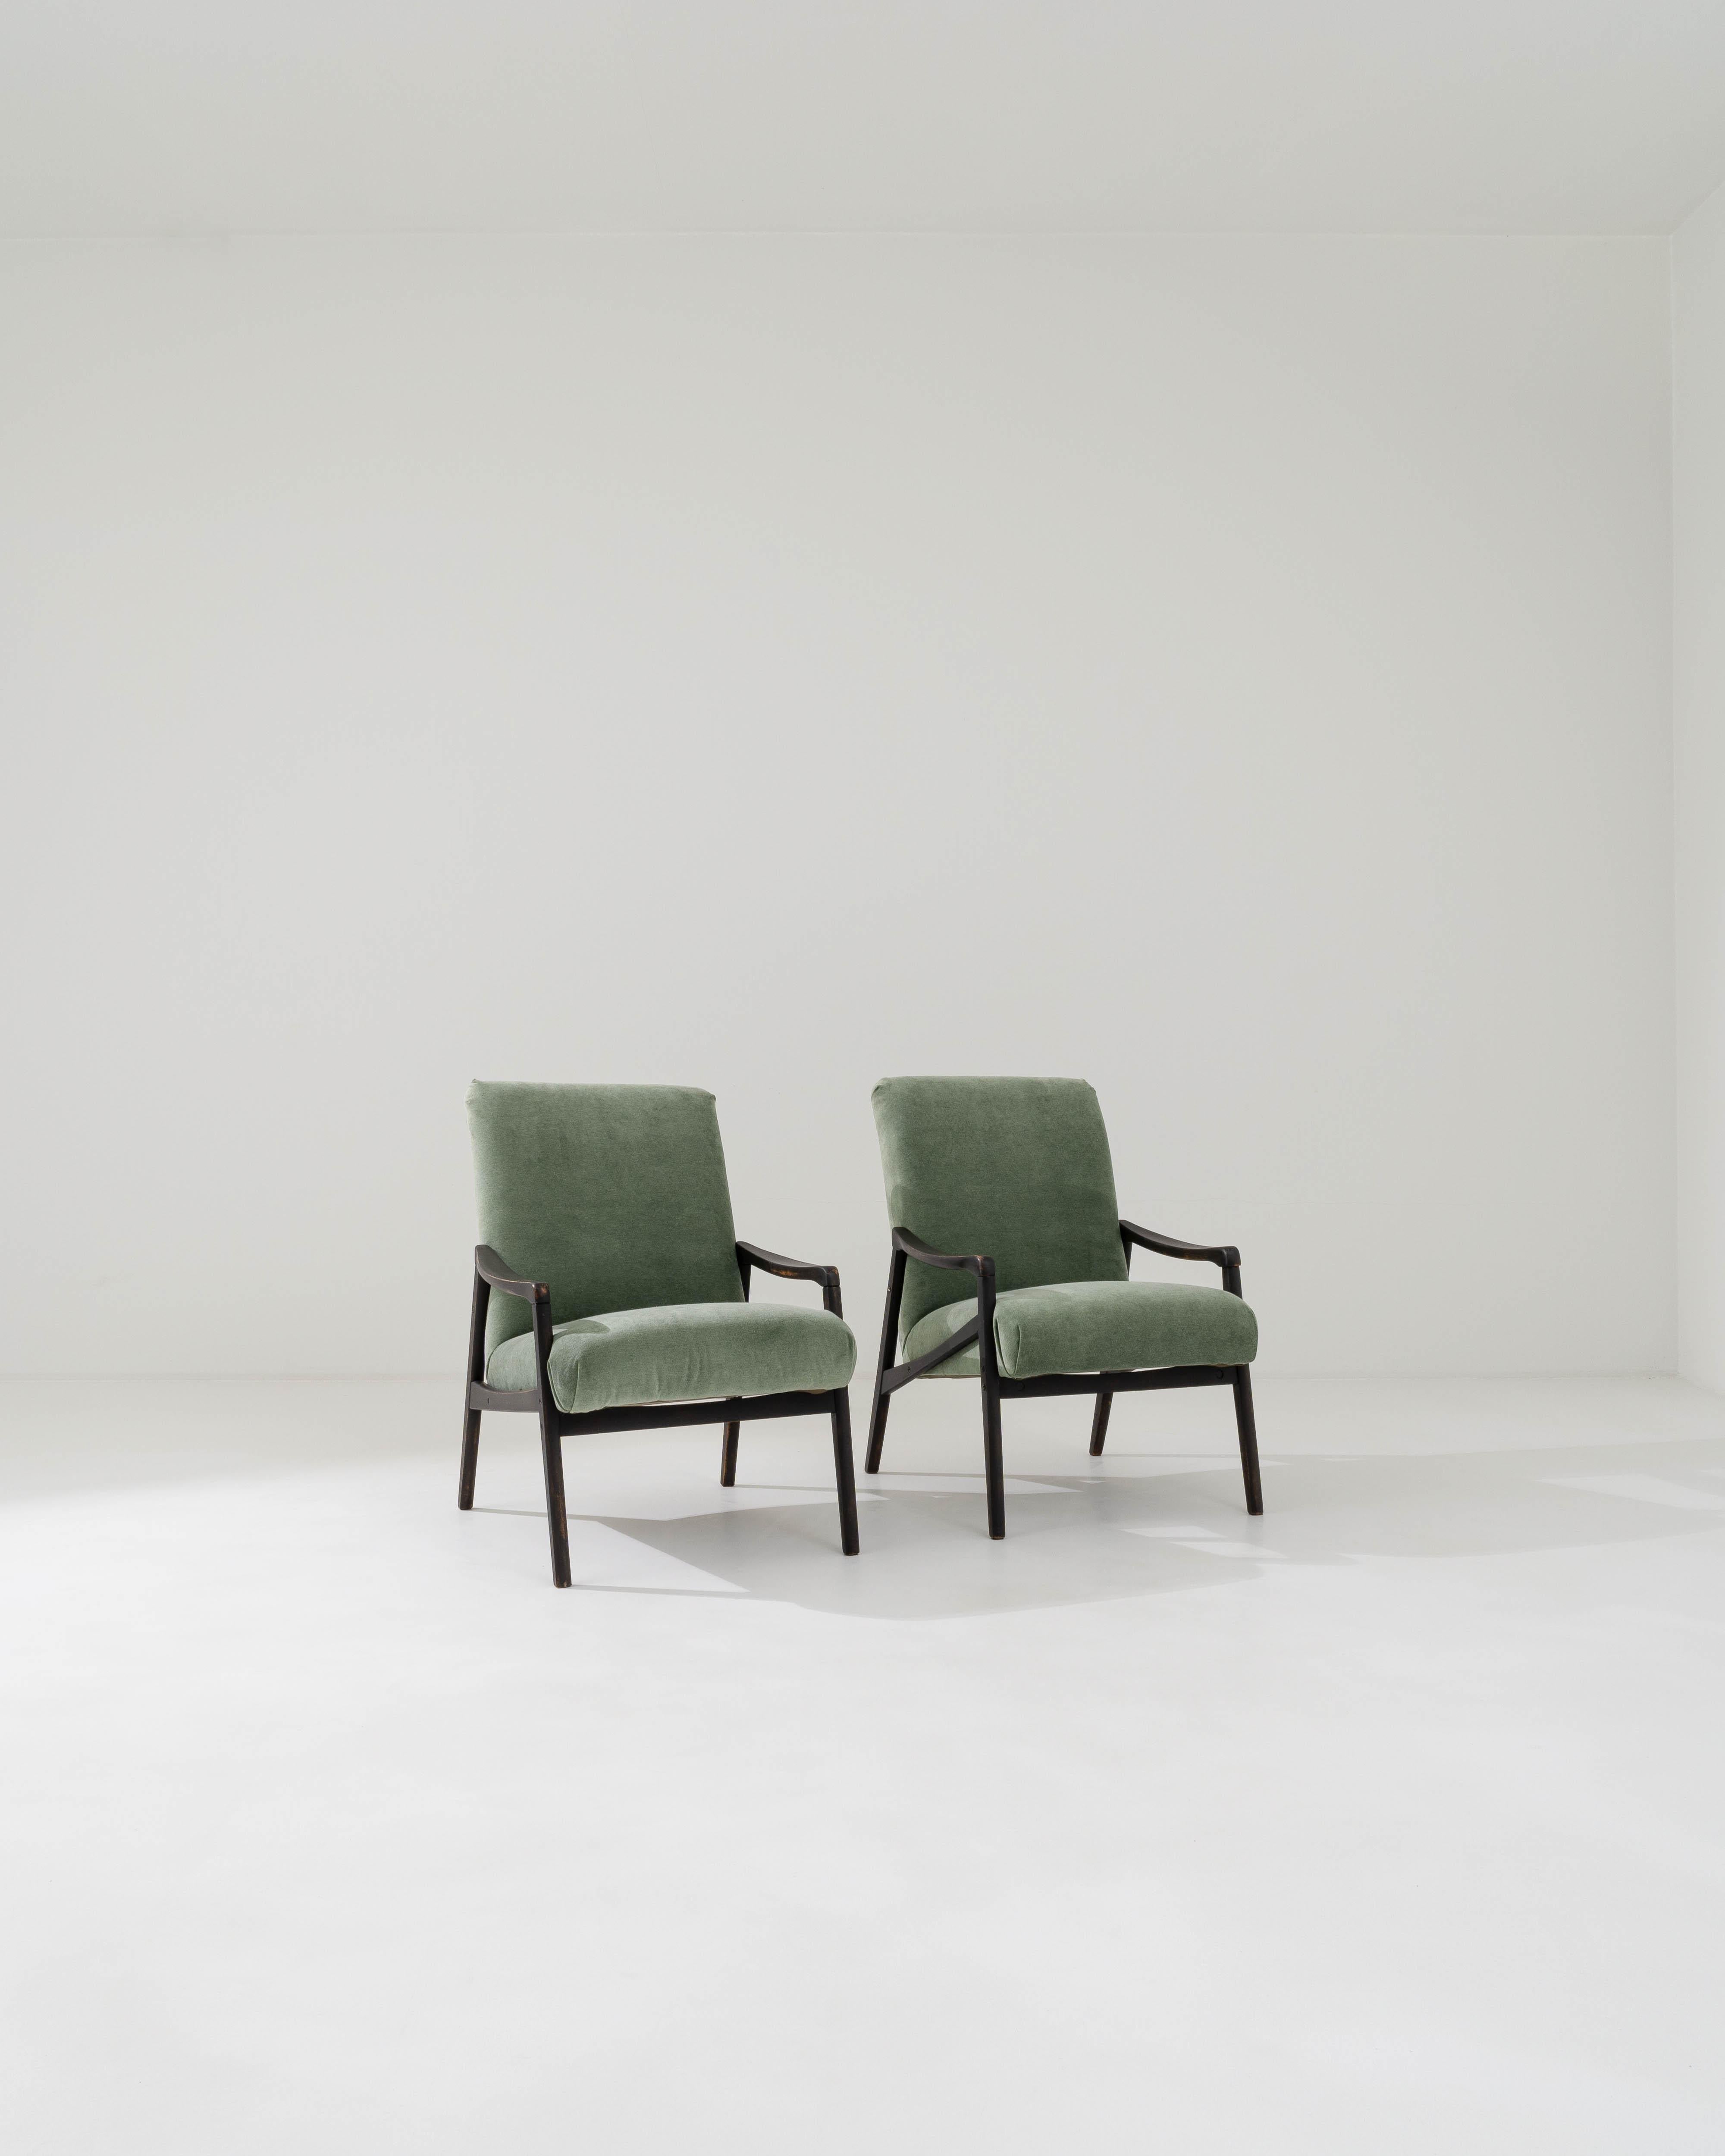 A pair of armchairs produced in the former Czechoslovakia, with the design attributed to Jiri Jiroutek. This 1960s design has been given a fresh look with velvety green reupholstery; the mossy hue softening the polished patina of the black hardwood